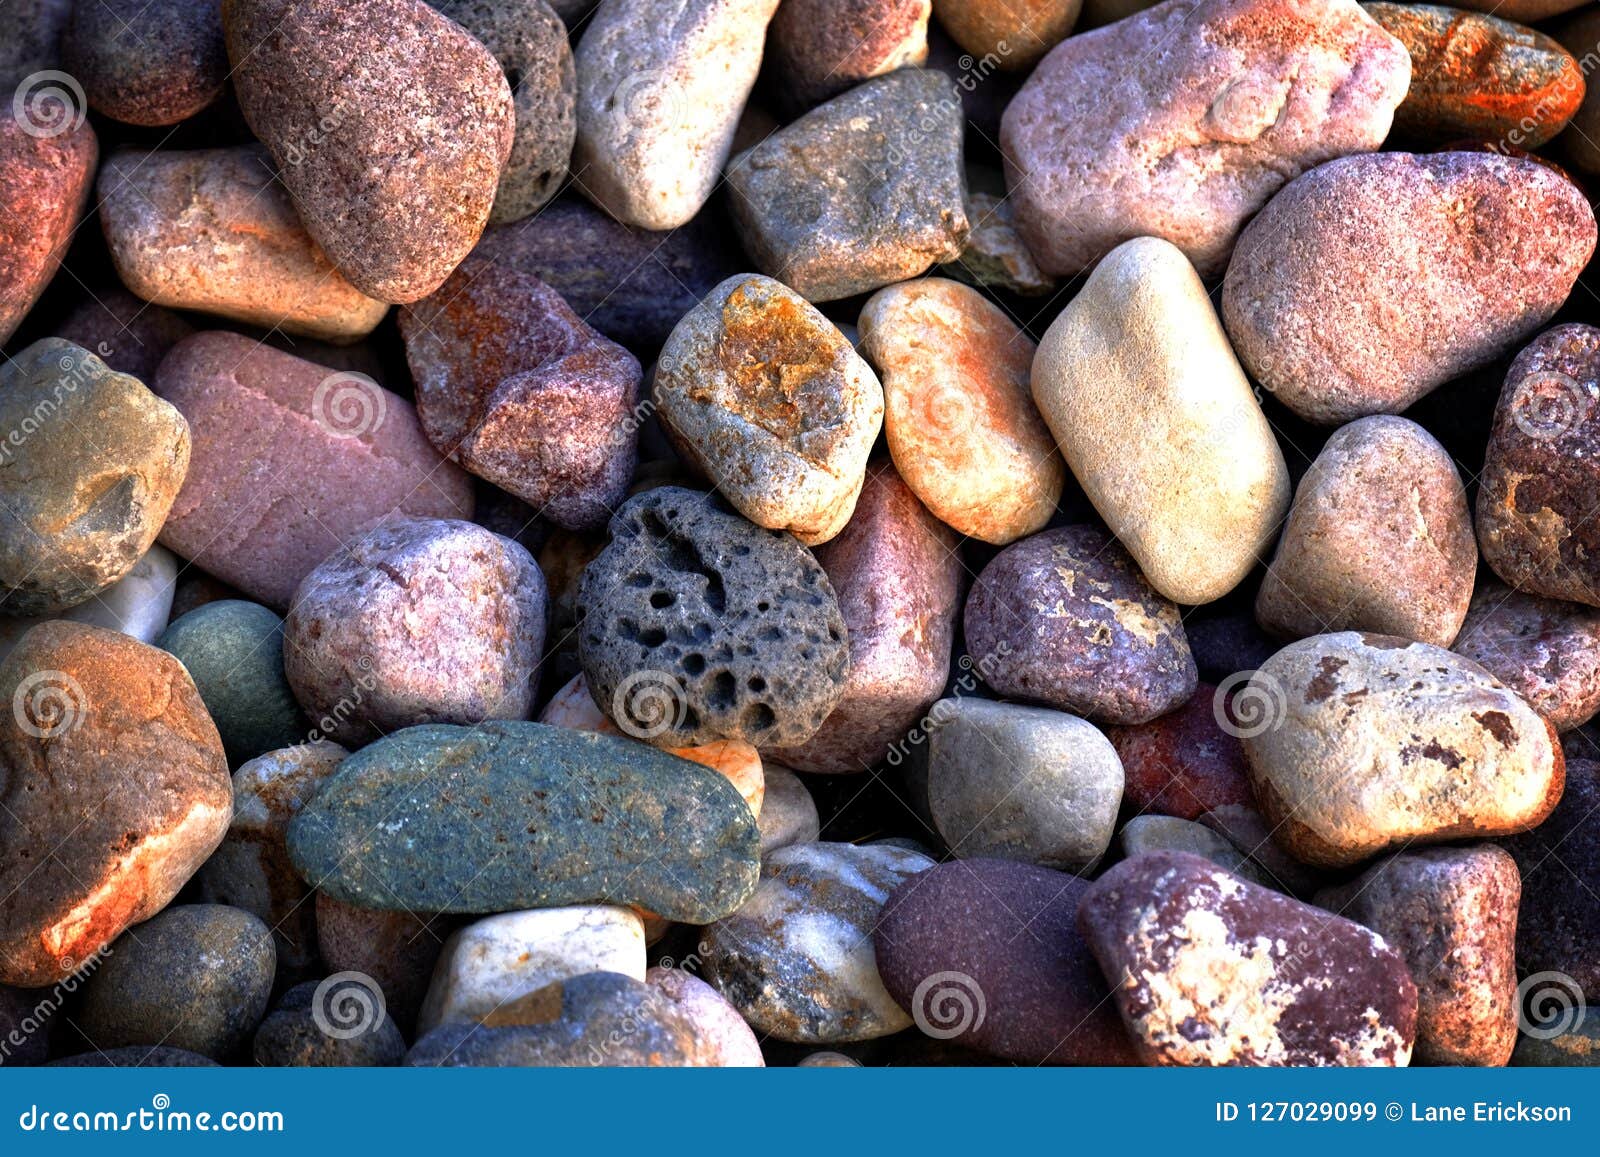 Rocks Smooth River Stones for Decoration and Landscaping Stock Image -  Image of grey, rough: 127029099